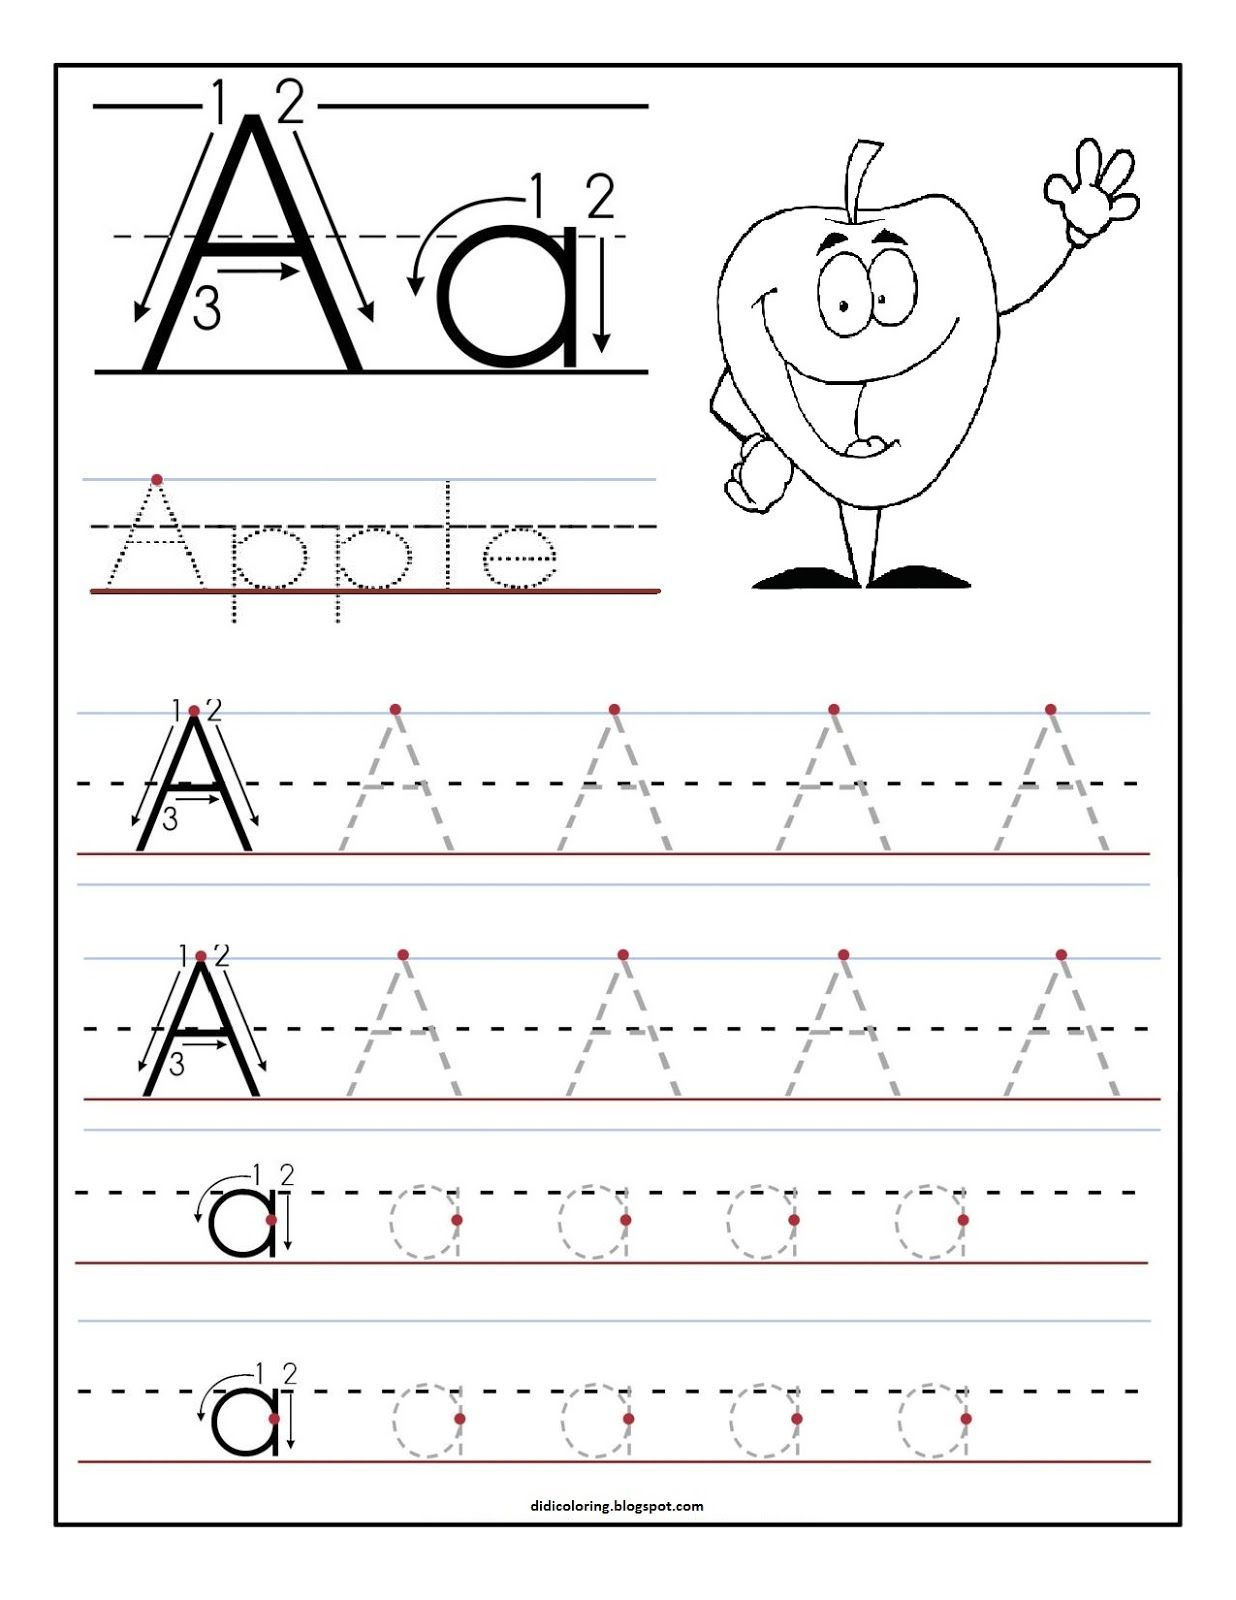 Free Preschool Writing Worksheets – With Also Addition Worksheet | Preschool Writing Worksheets Free Printable